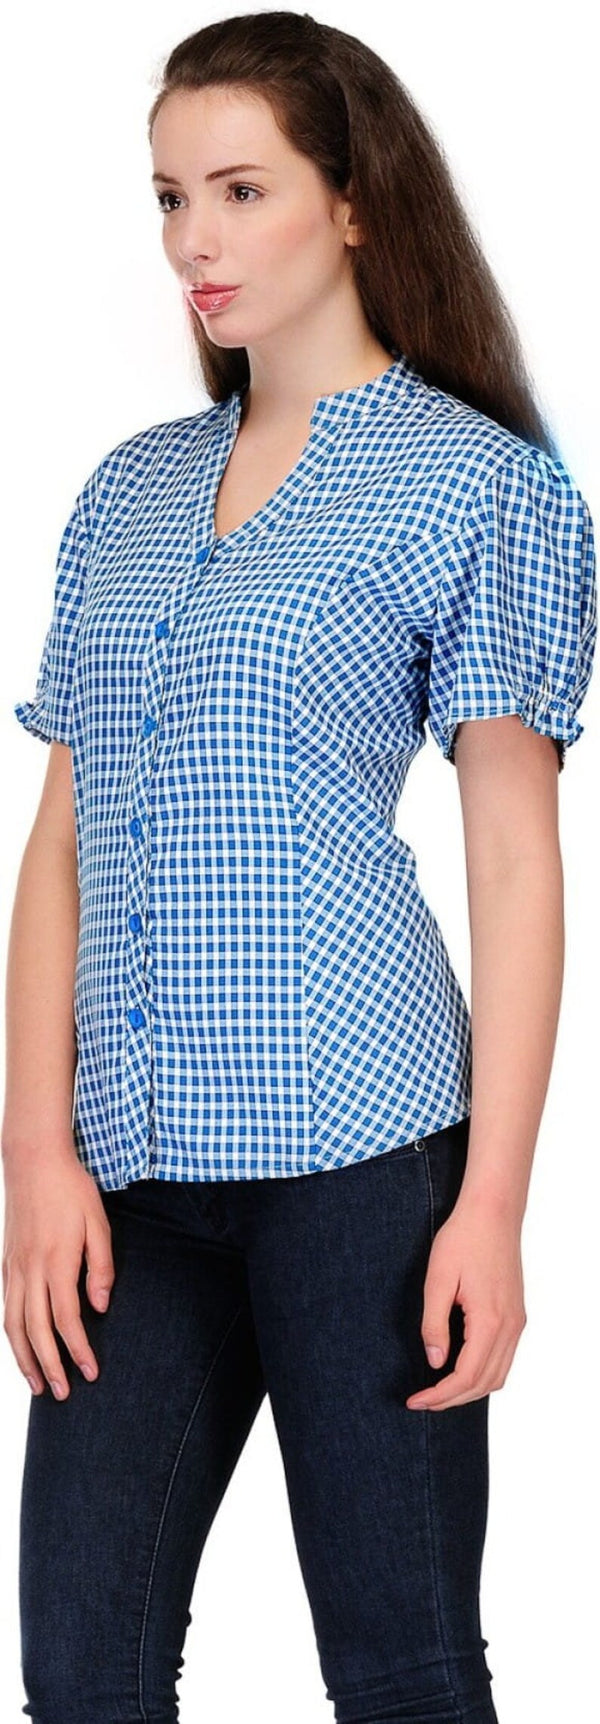 Blue Check Top for Women  , FREE  DELIVERY